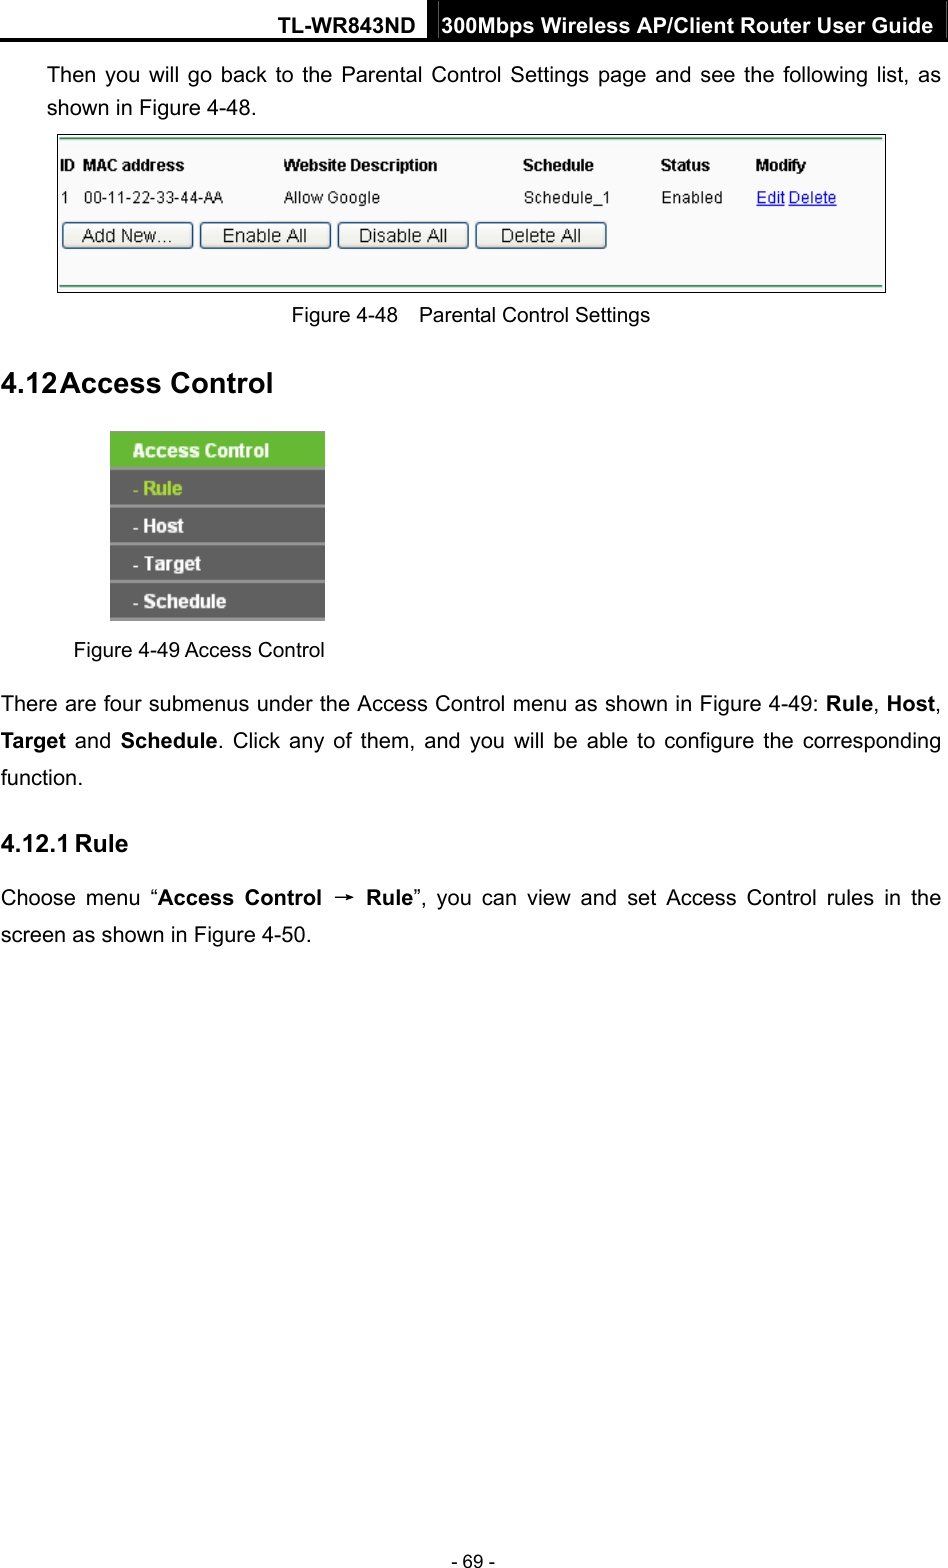 TL-WR843ND 300Mbps Wireless AP/Client Router User Guide - 69 - Then you will go back to the Parental Control Settings page and see the following list, as shown in Figure 4-48.  Figure 4-48    Parental Control Settings 4.12 Access Control  Figure 4-49 Access Control There are four submenus under the Access Control menu as shown in Figure 4-49: Rule, Host, Target and Schedule. Click any of them, and you will be able to configure the corresponding function. 4.12.1 Rule Choose menu “Access Control → Rule”, you can view and set Access Control rules in the screen as shown in Figure 4-50.  